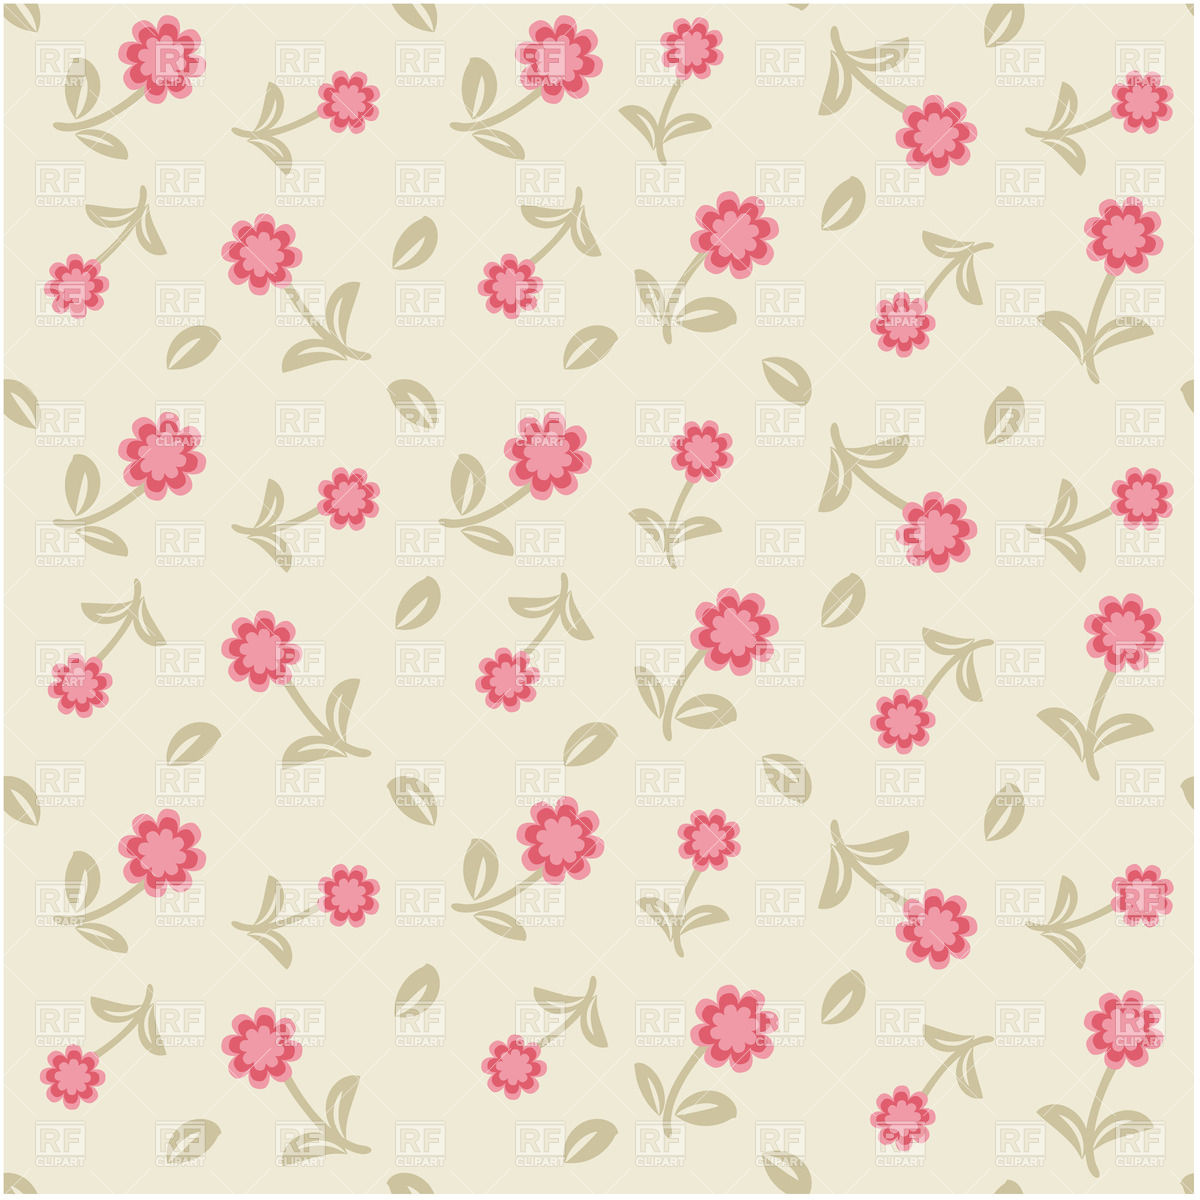 Floral Seamless Background Download Royalty Free Vector Clipart  Eps